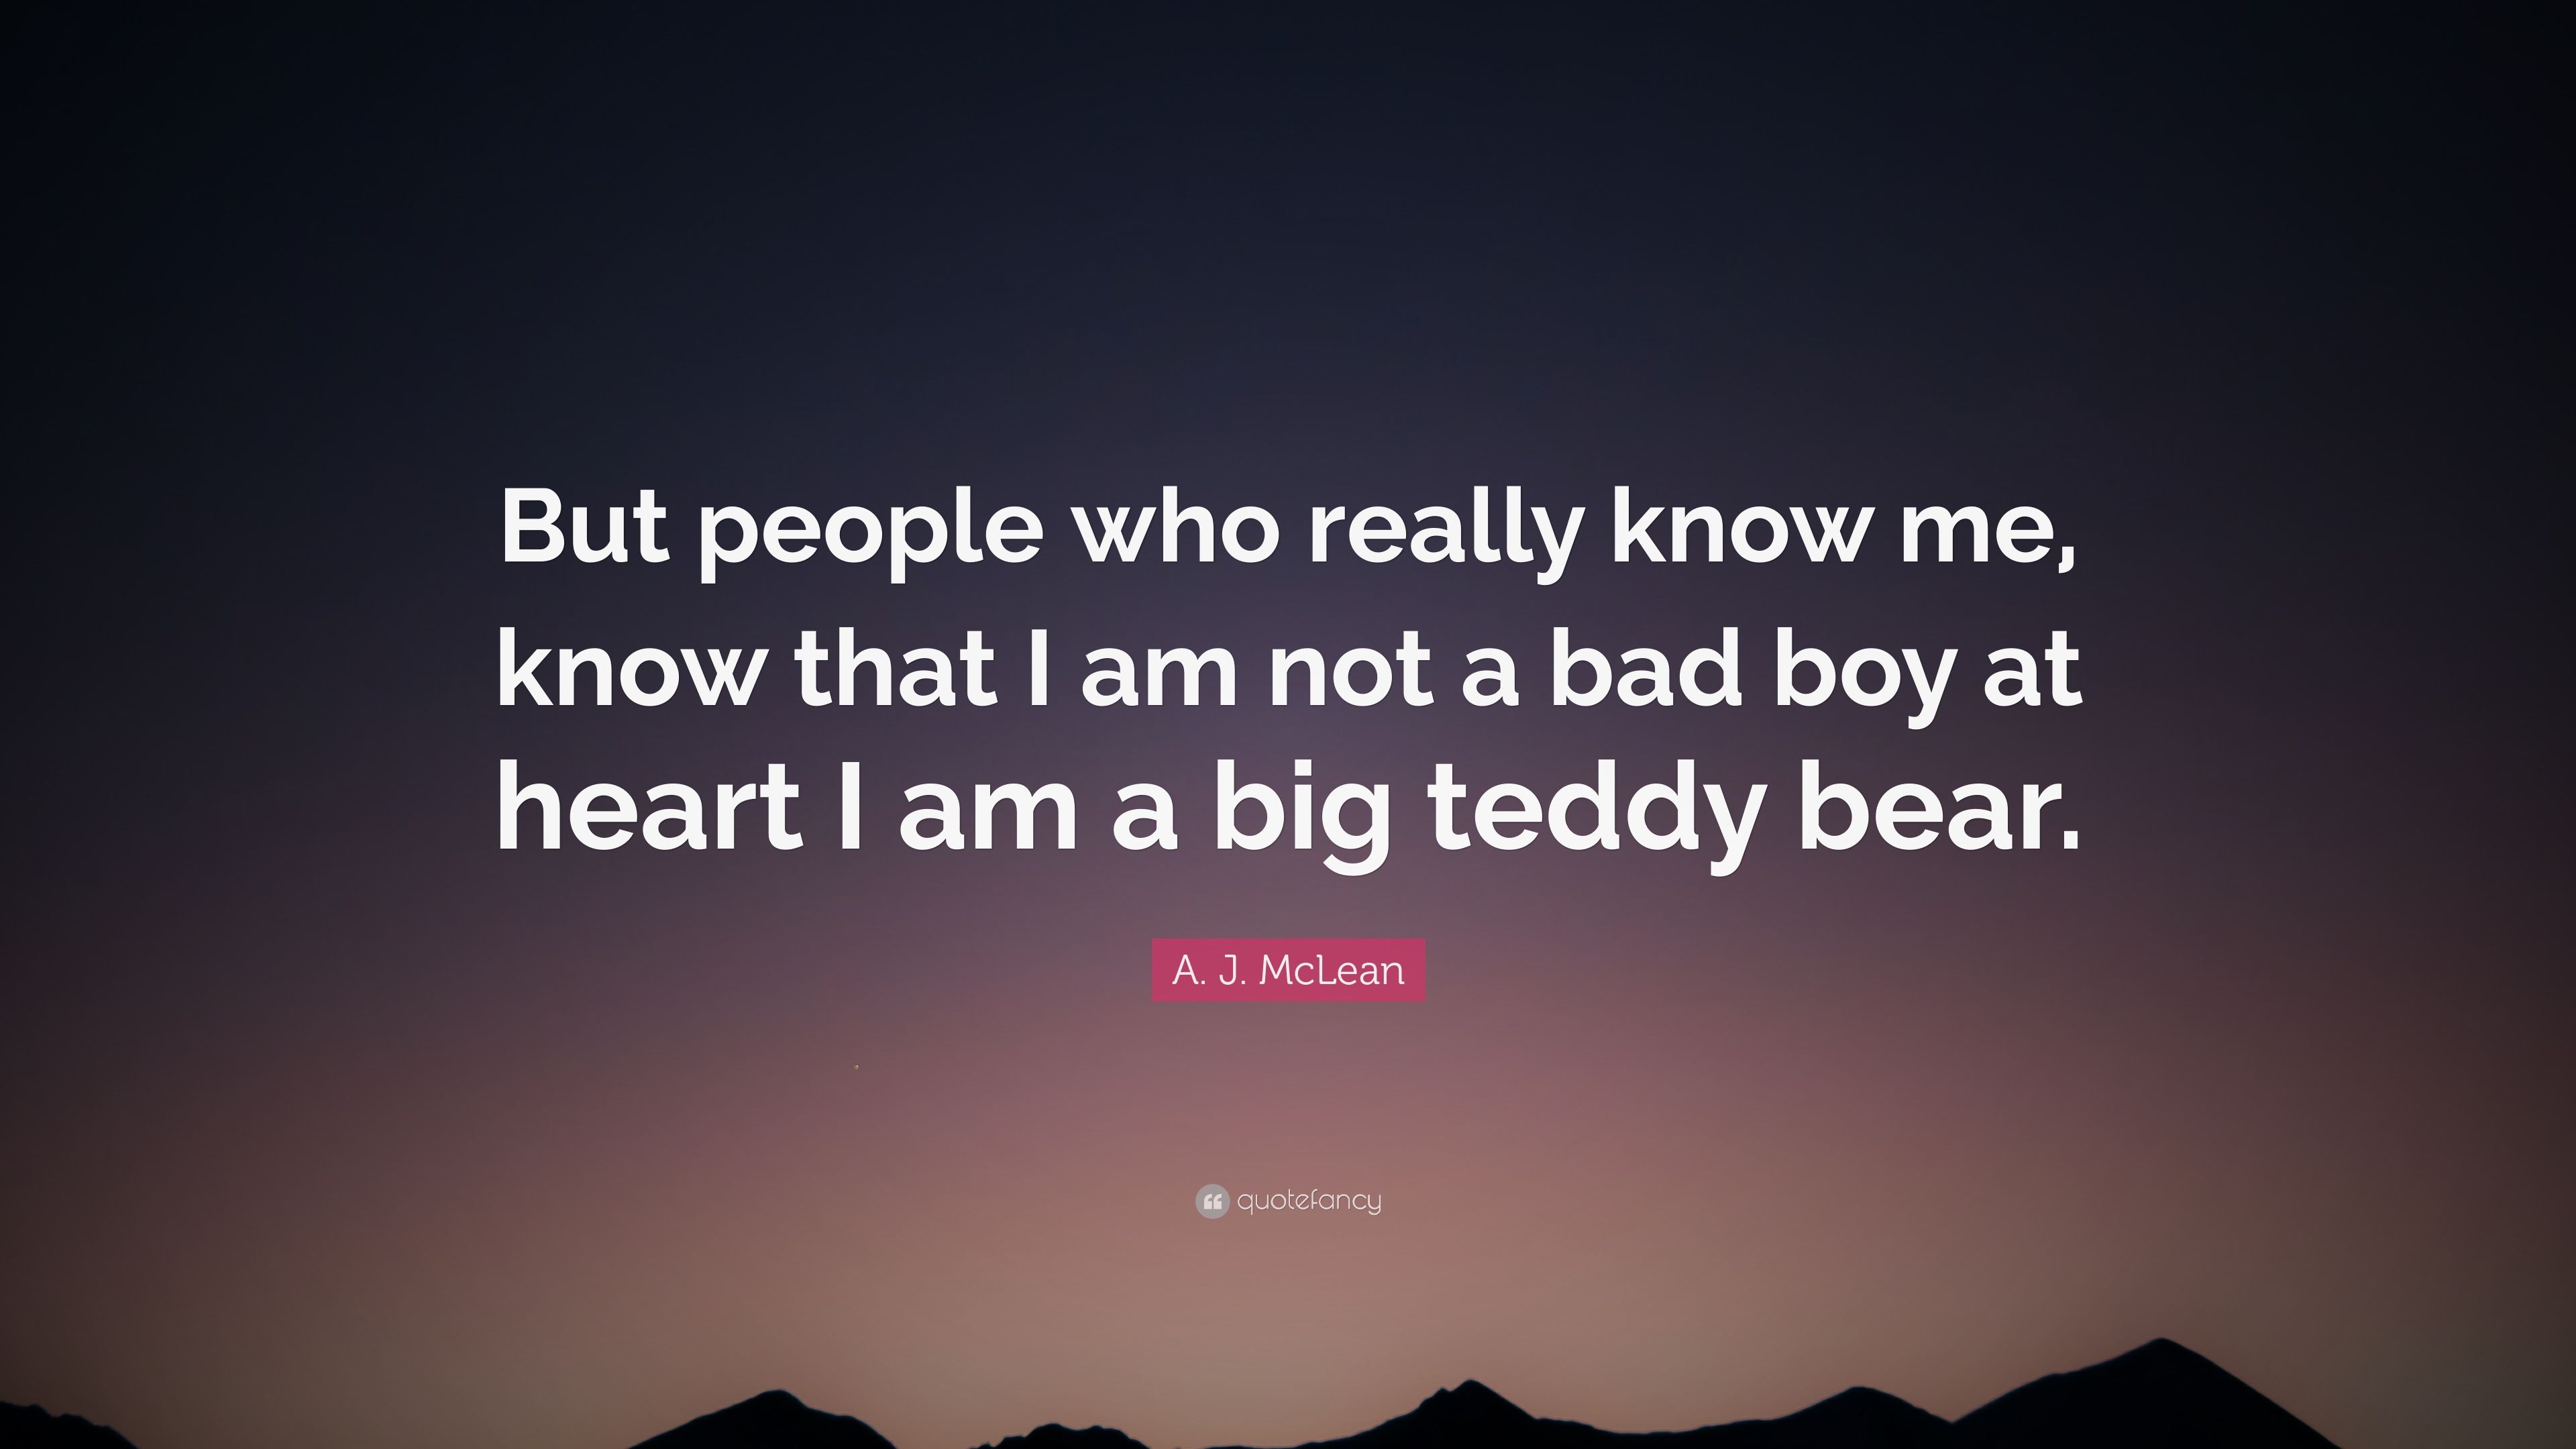 A. J. McLean Quote: “But people who really know me, know that I am